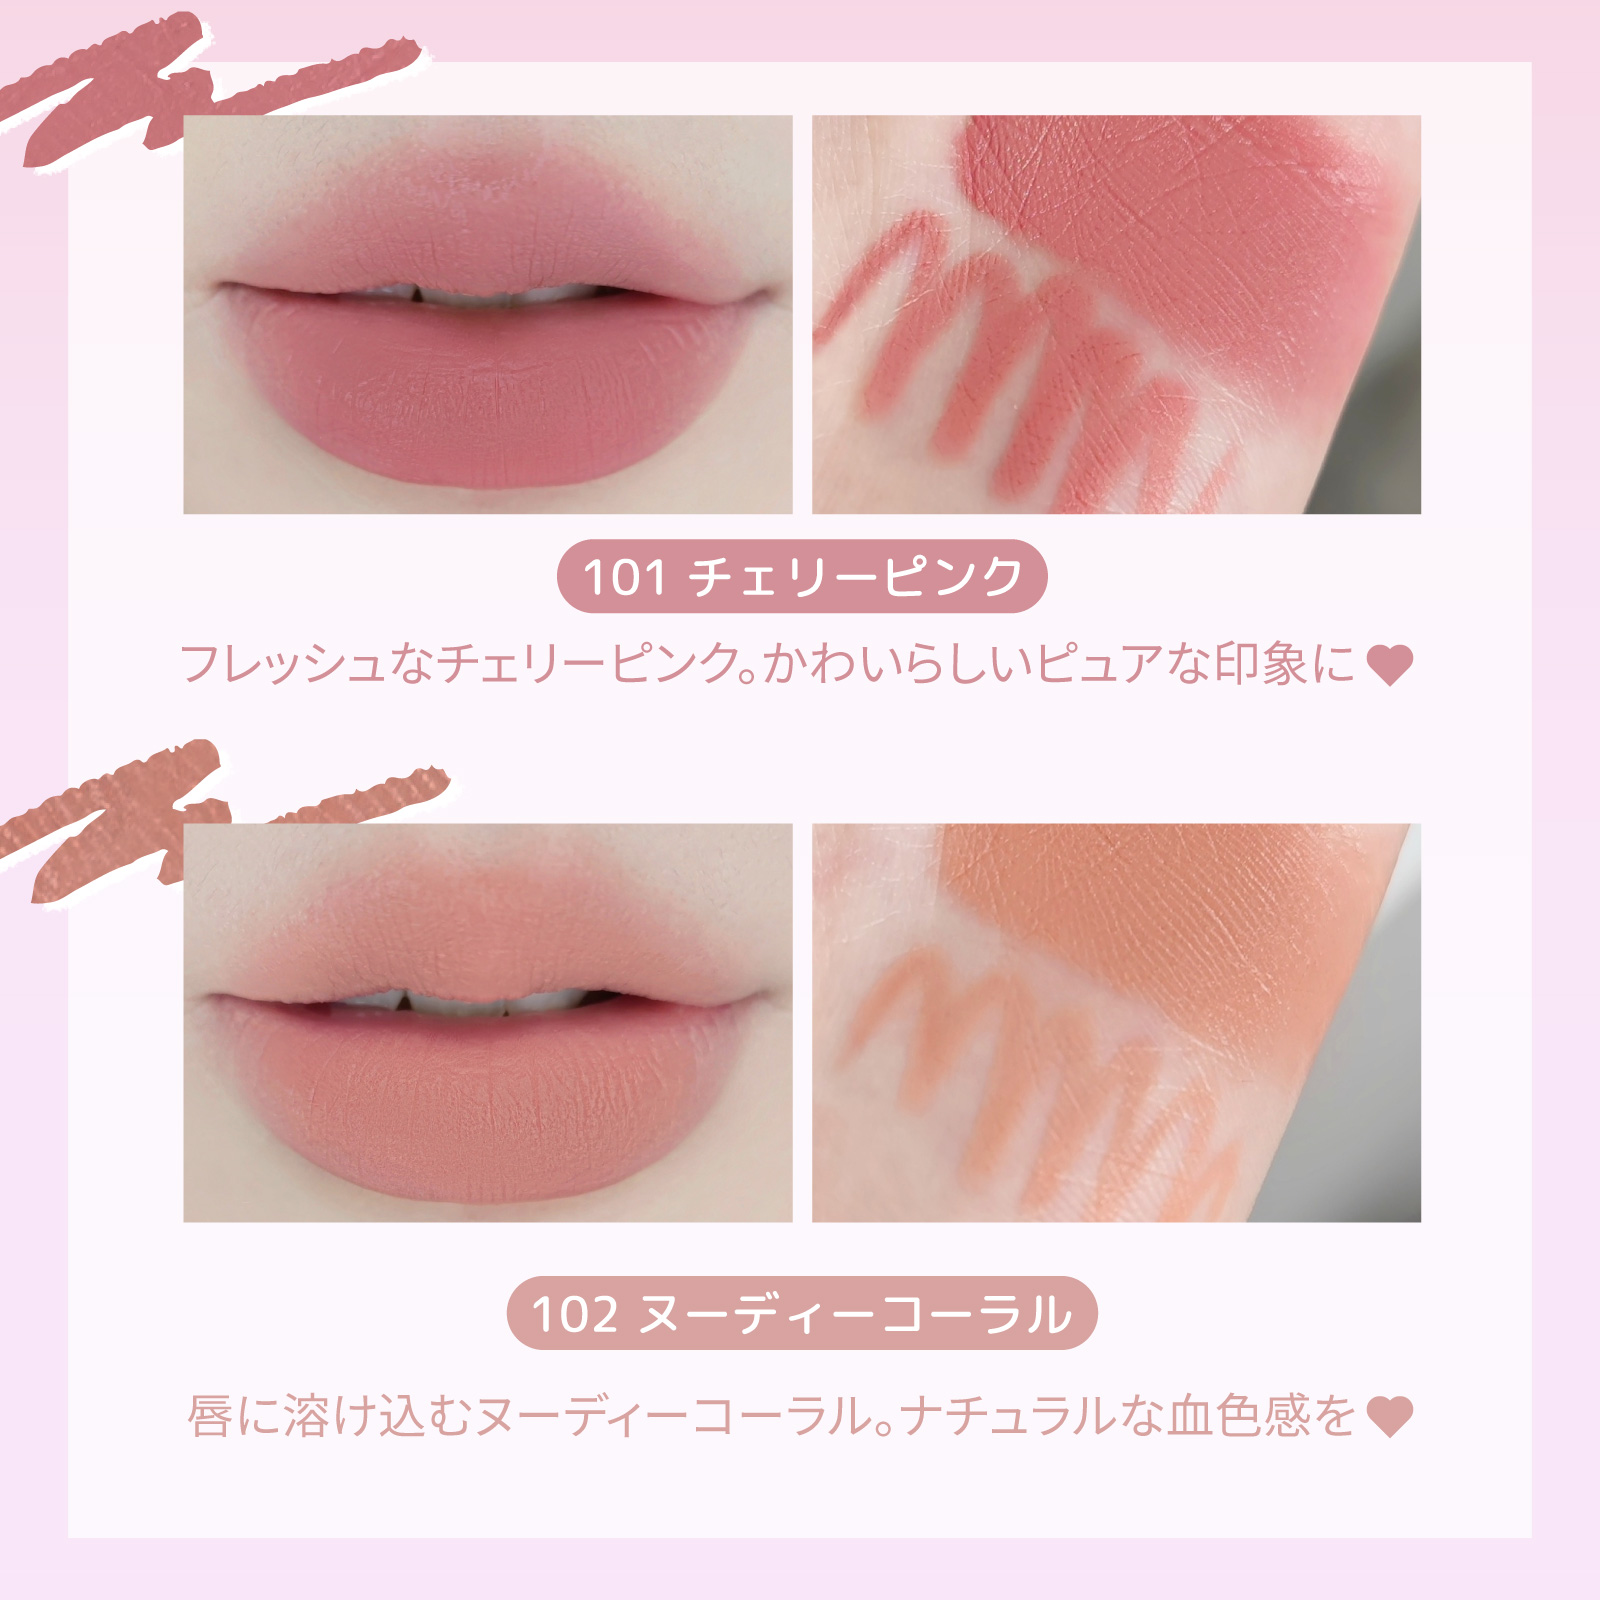 [ official ] Jill Lee n the smallest laughing . lip pen sill (101 Cherry pink ) lip liner lip make-up the smallest laughing .. angle UP jill leen.